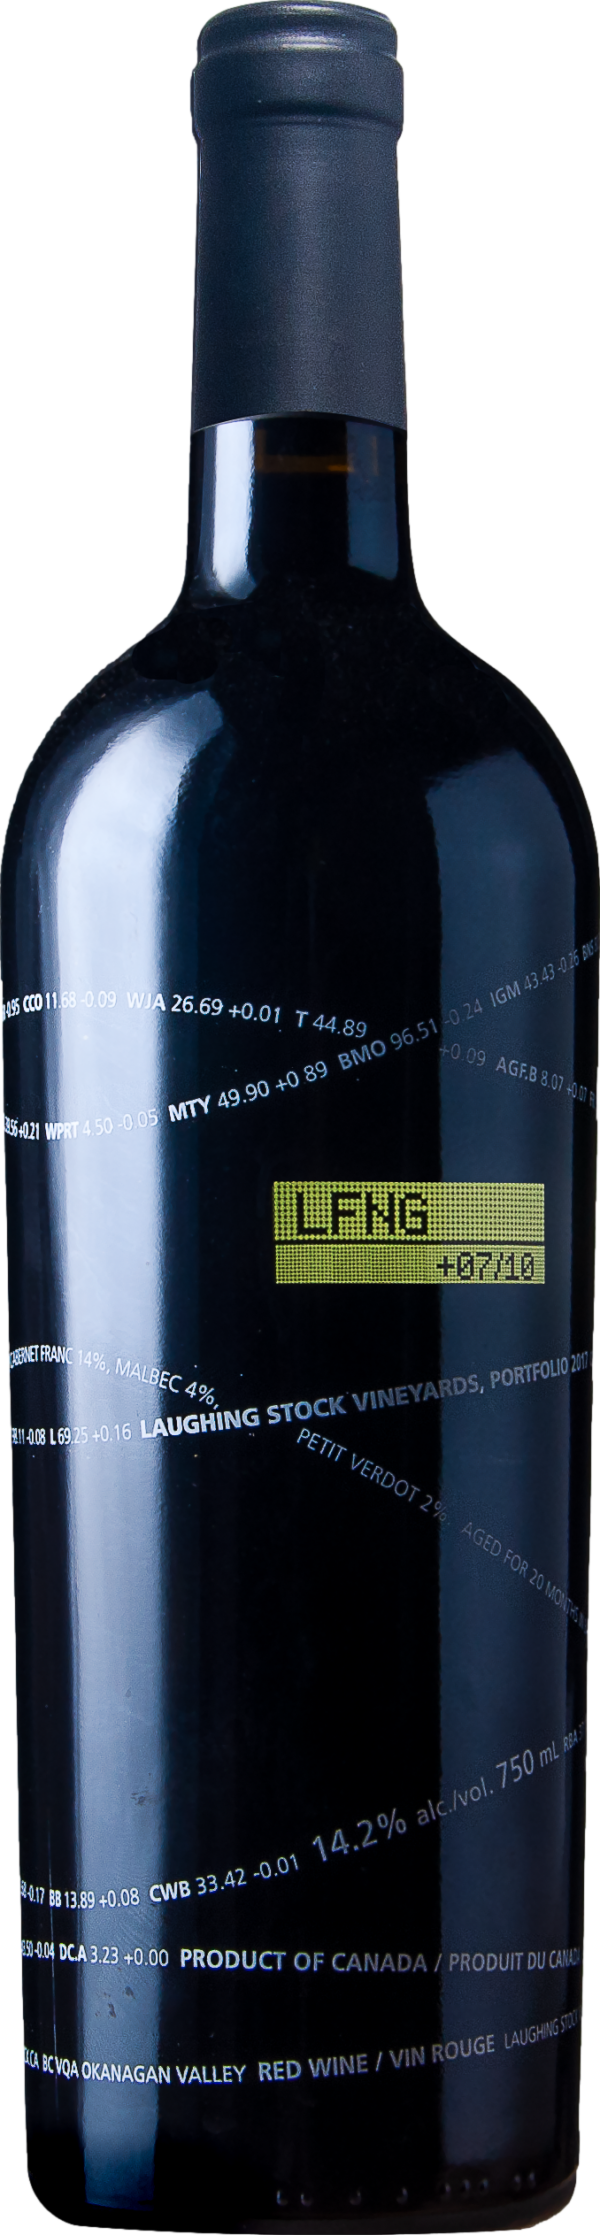 Product image of Laughing Stock Vineyards Portfolio 2019 from 8wines